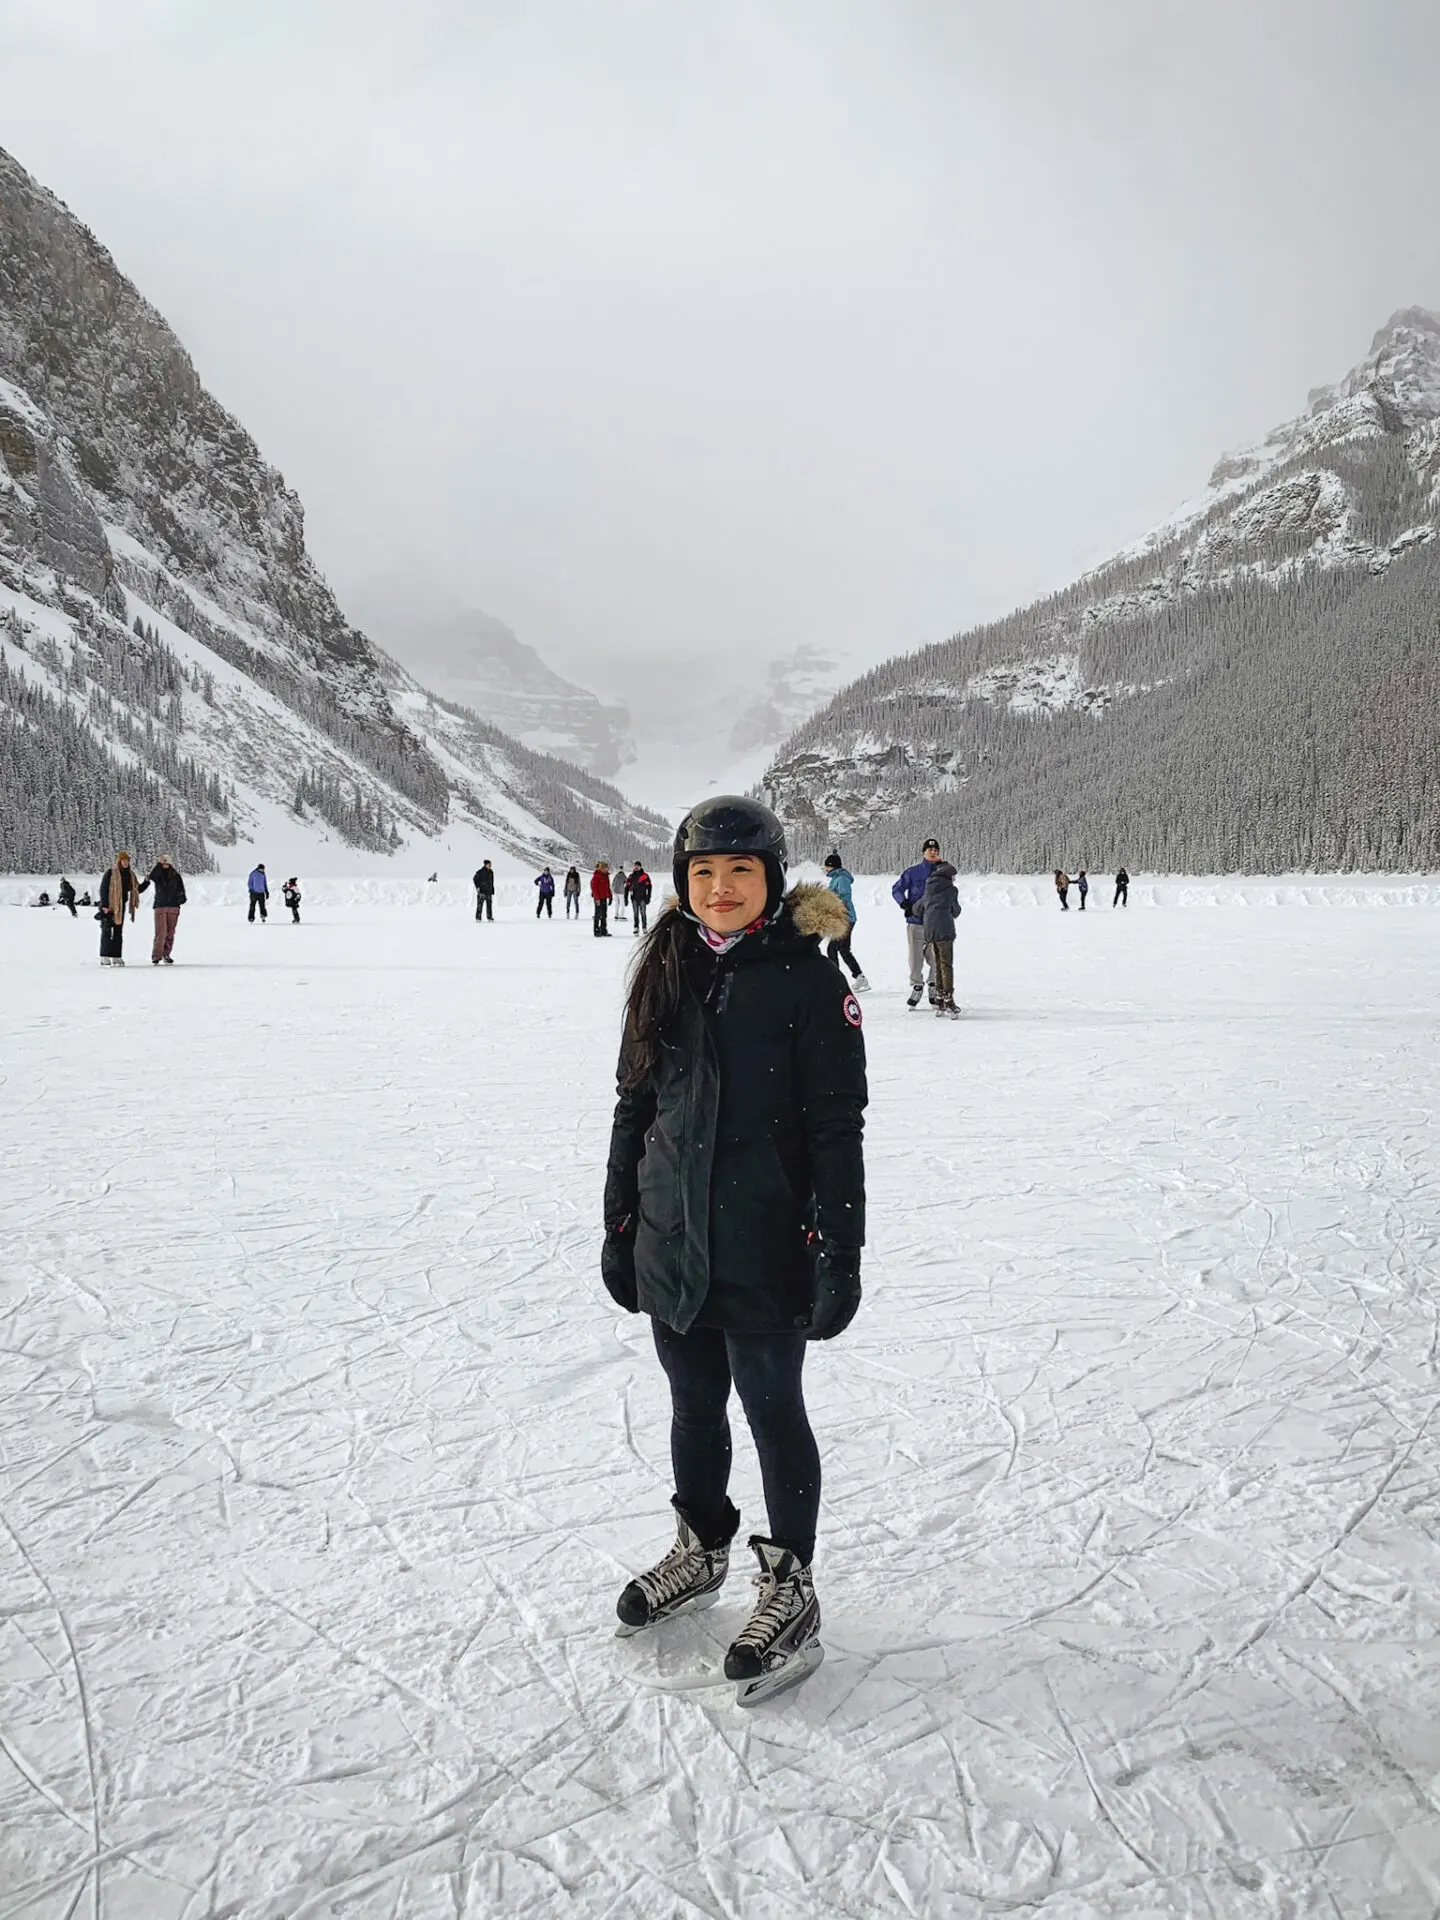 Frozen and snowy Lake Louise during winter